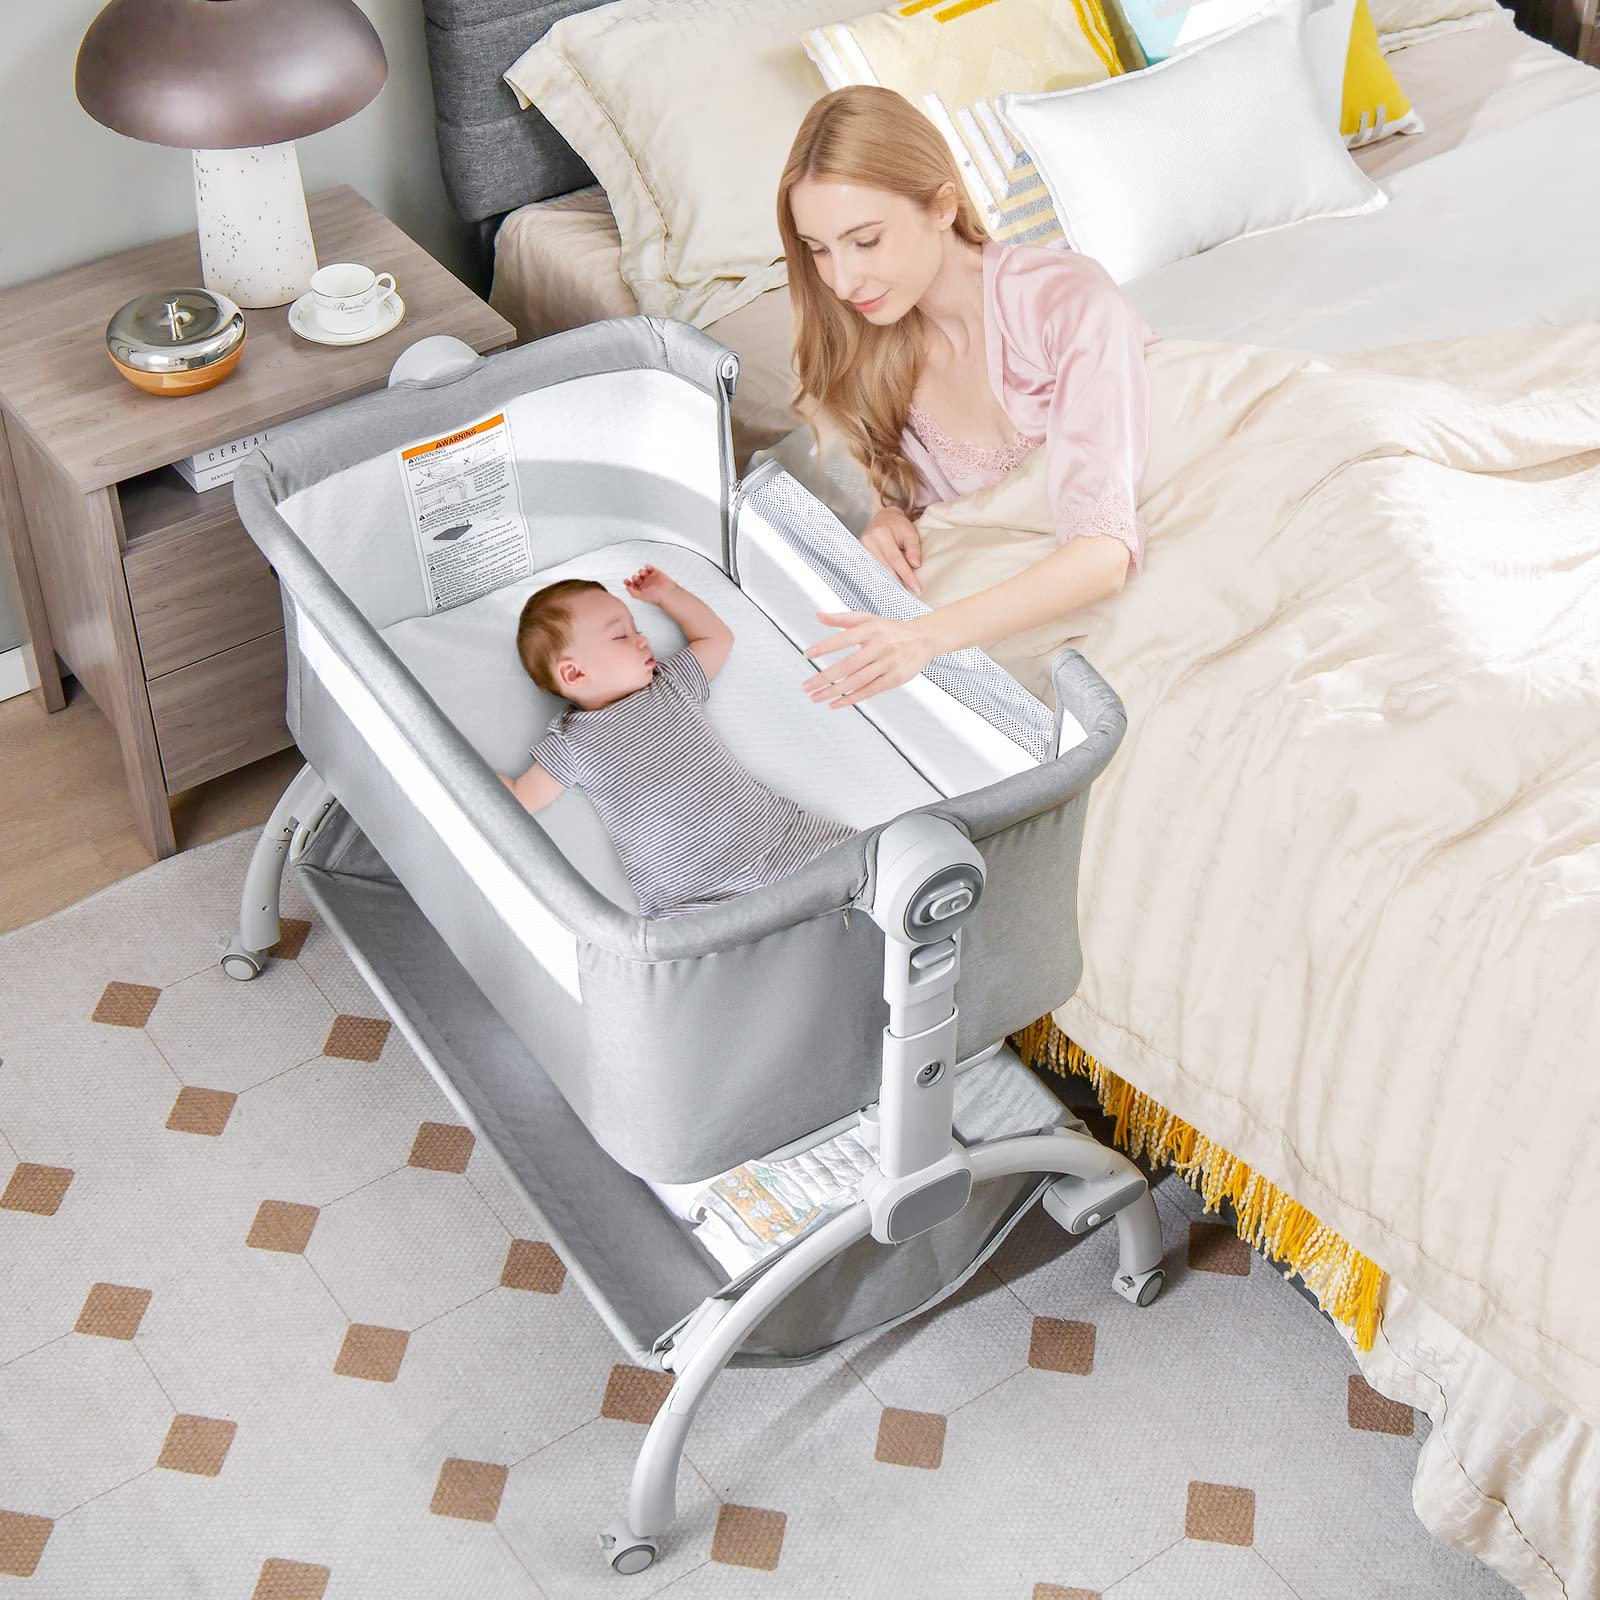 INFANS 3 in 1 Baby Bassinet, Bedside Sleeper, Rocking Cradle, Portable Safer Co-Sleeping Crib with Height Angle Adjustable